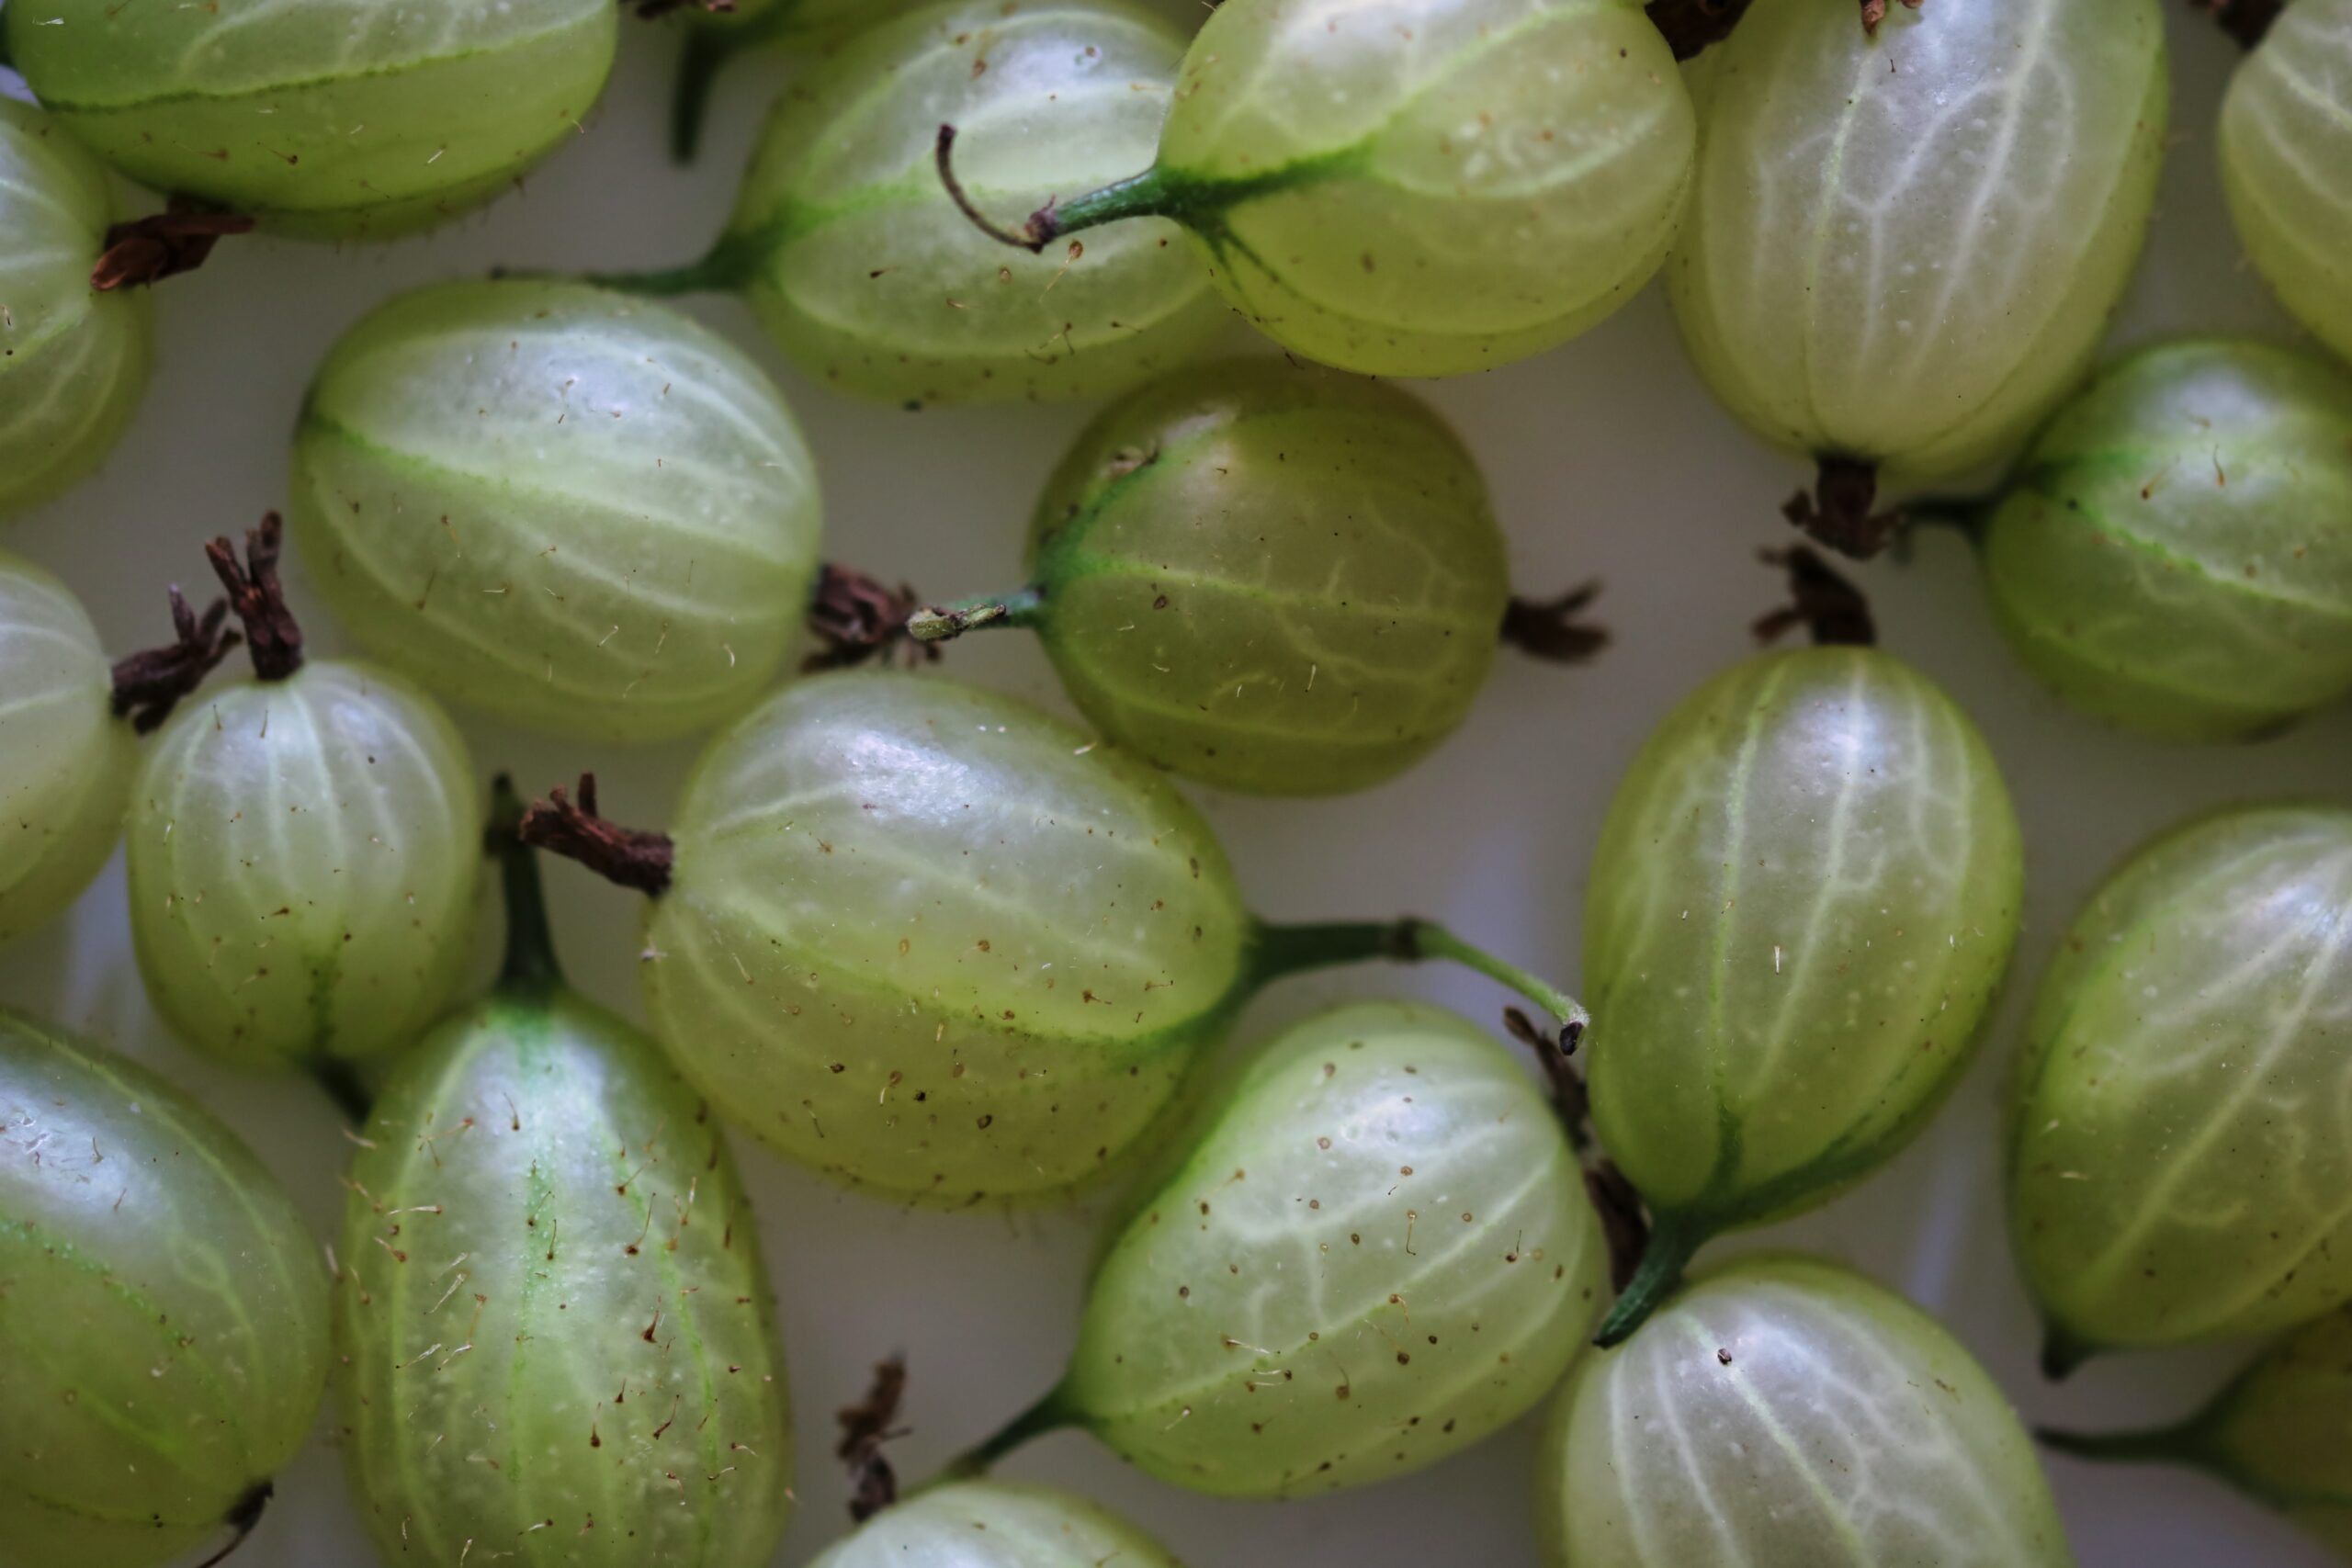 "Gooseberry: A Nutrient-Packed Superfruit for Your Health"